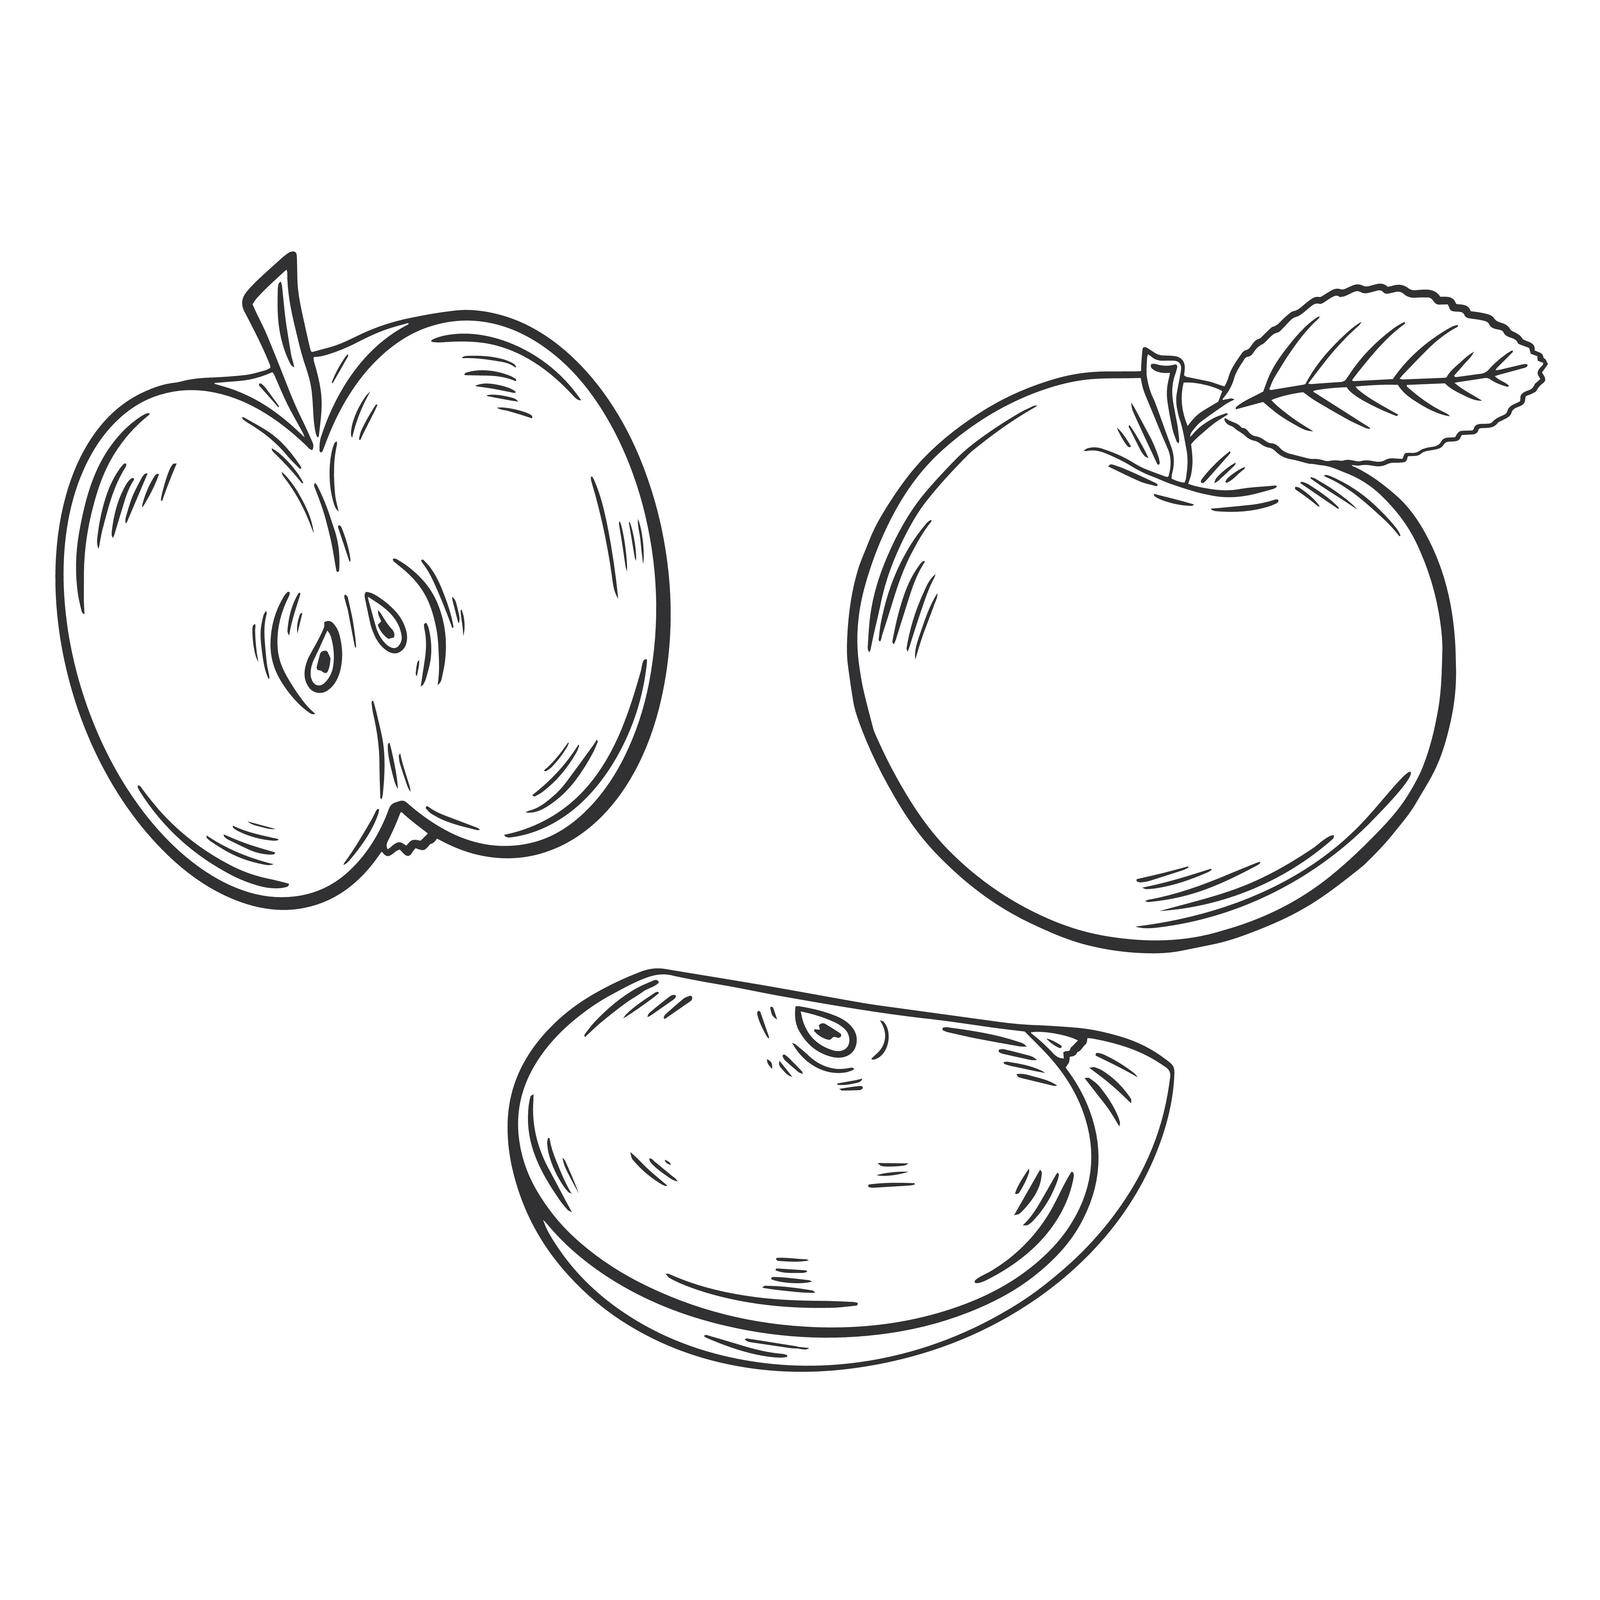 Apples set engraved vector illustration. Apple whole with leaf, half and piece vintage. Isolated fruit hand sketch on white background